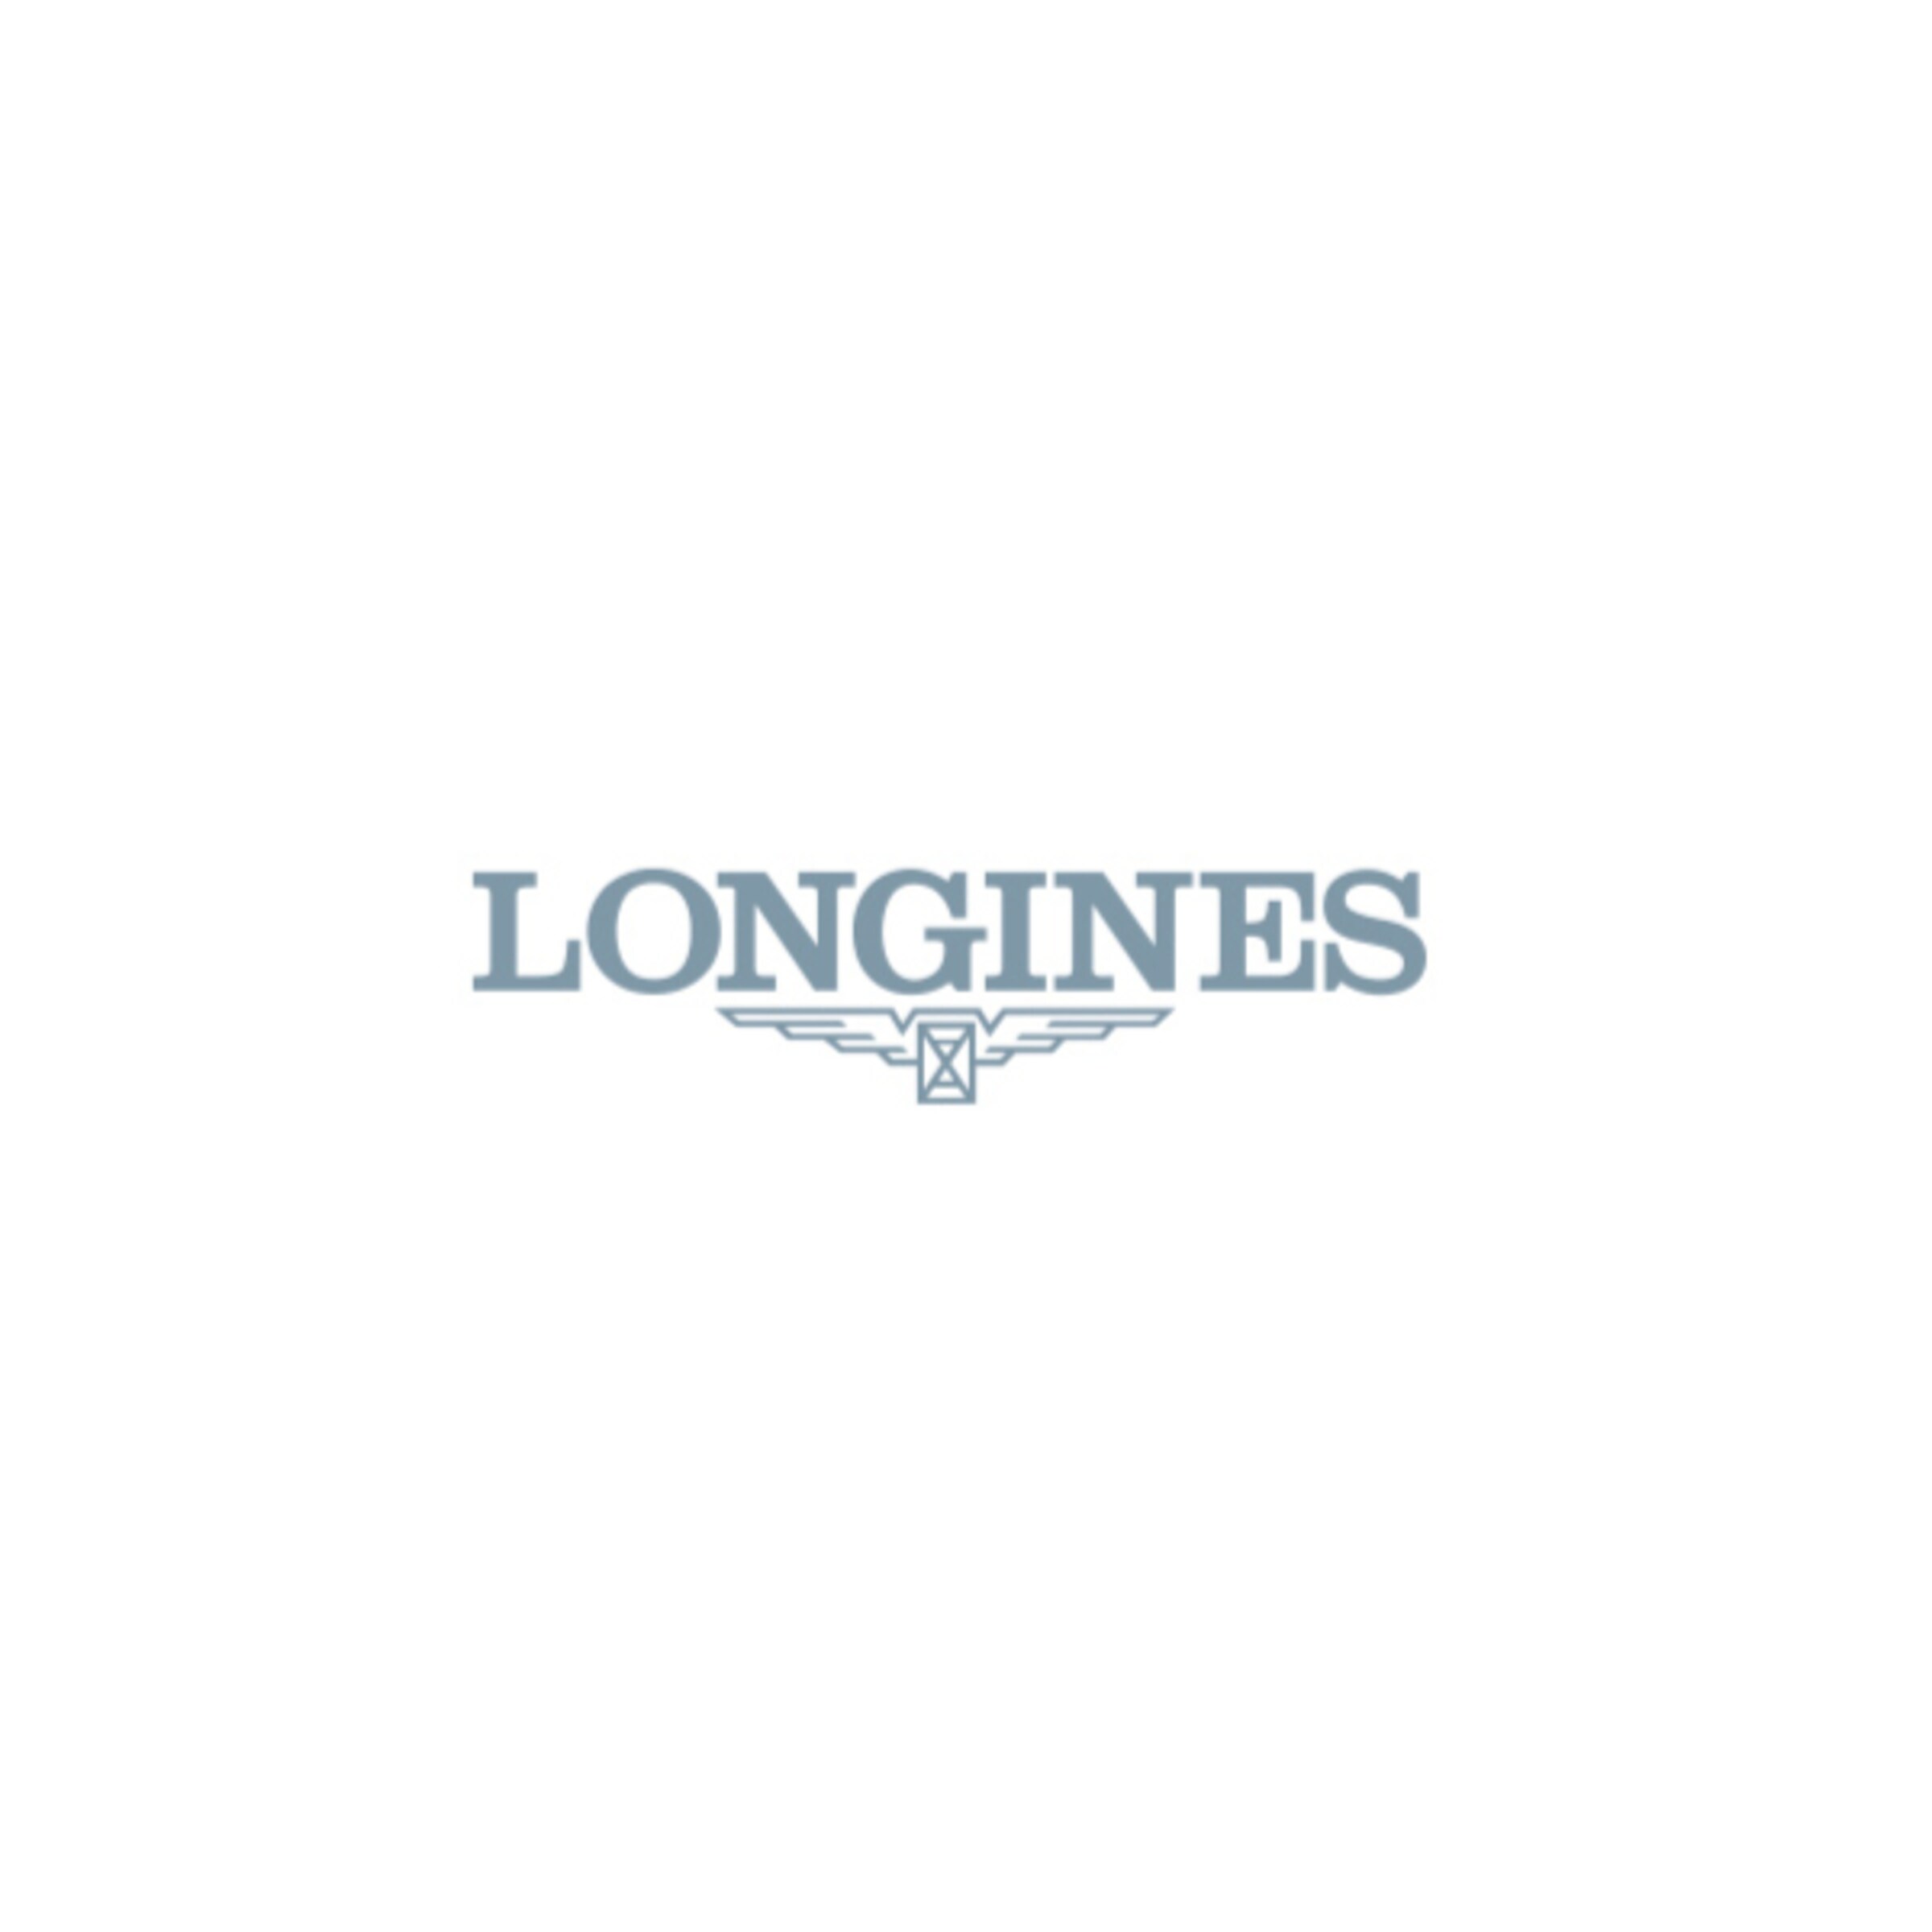 Longines SPIRIT Automatic Stainless steel Watch - L3.410.4.53.6